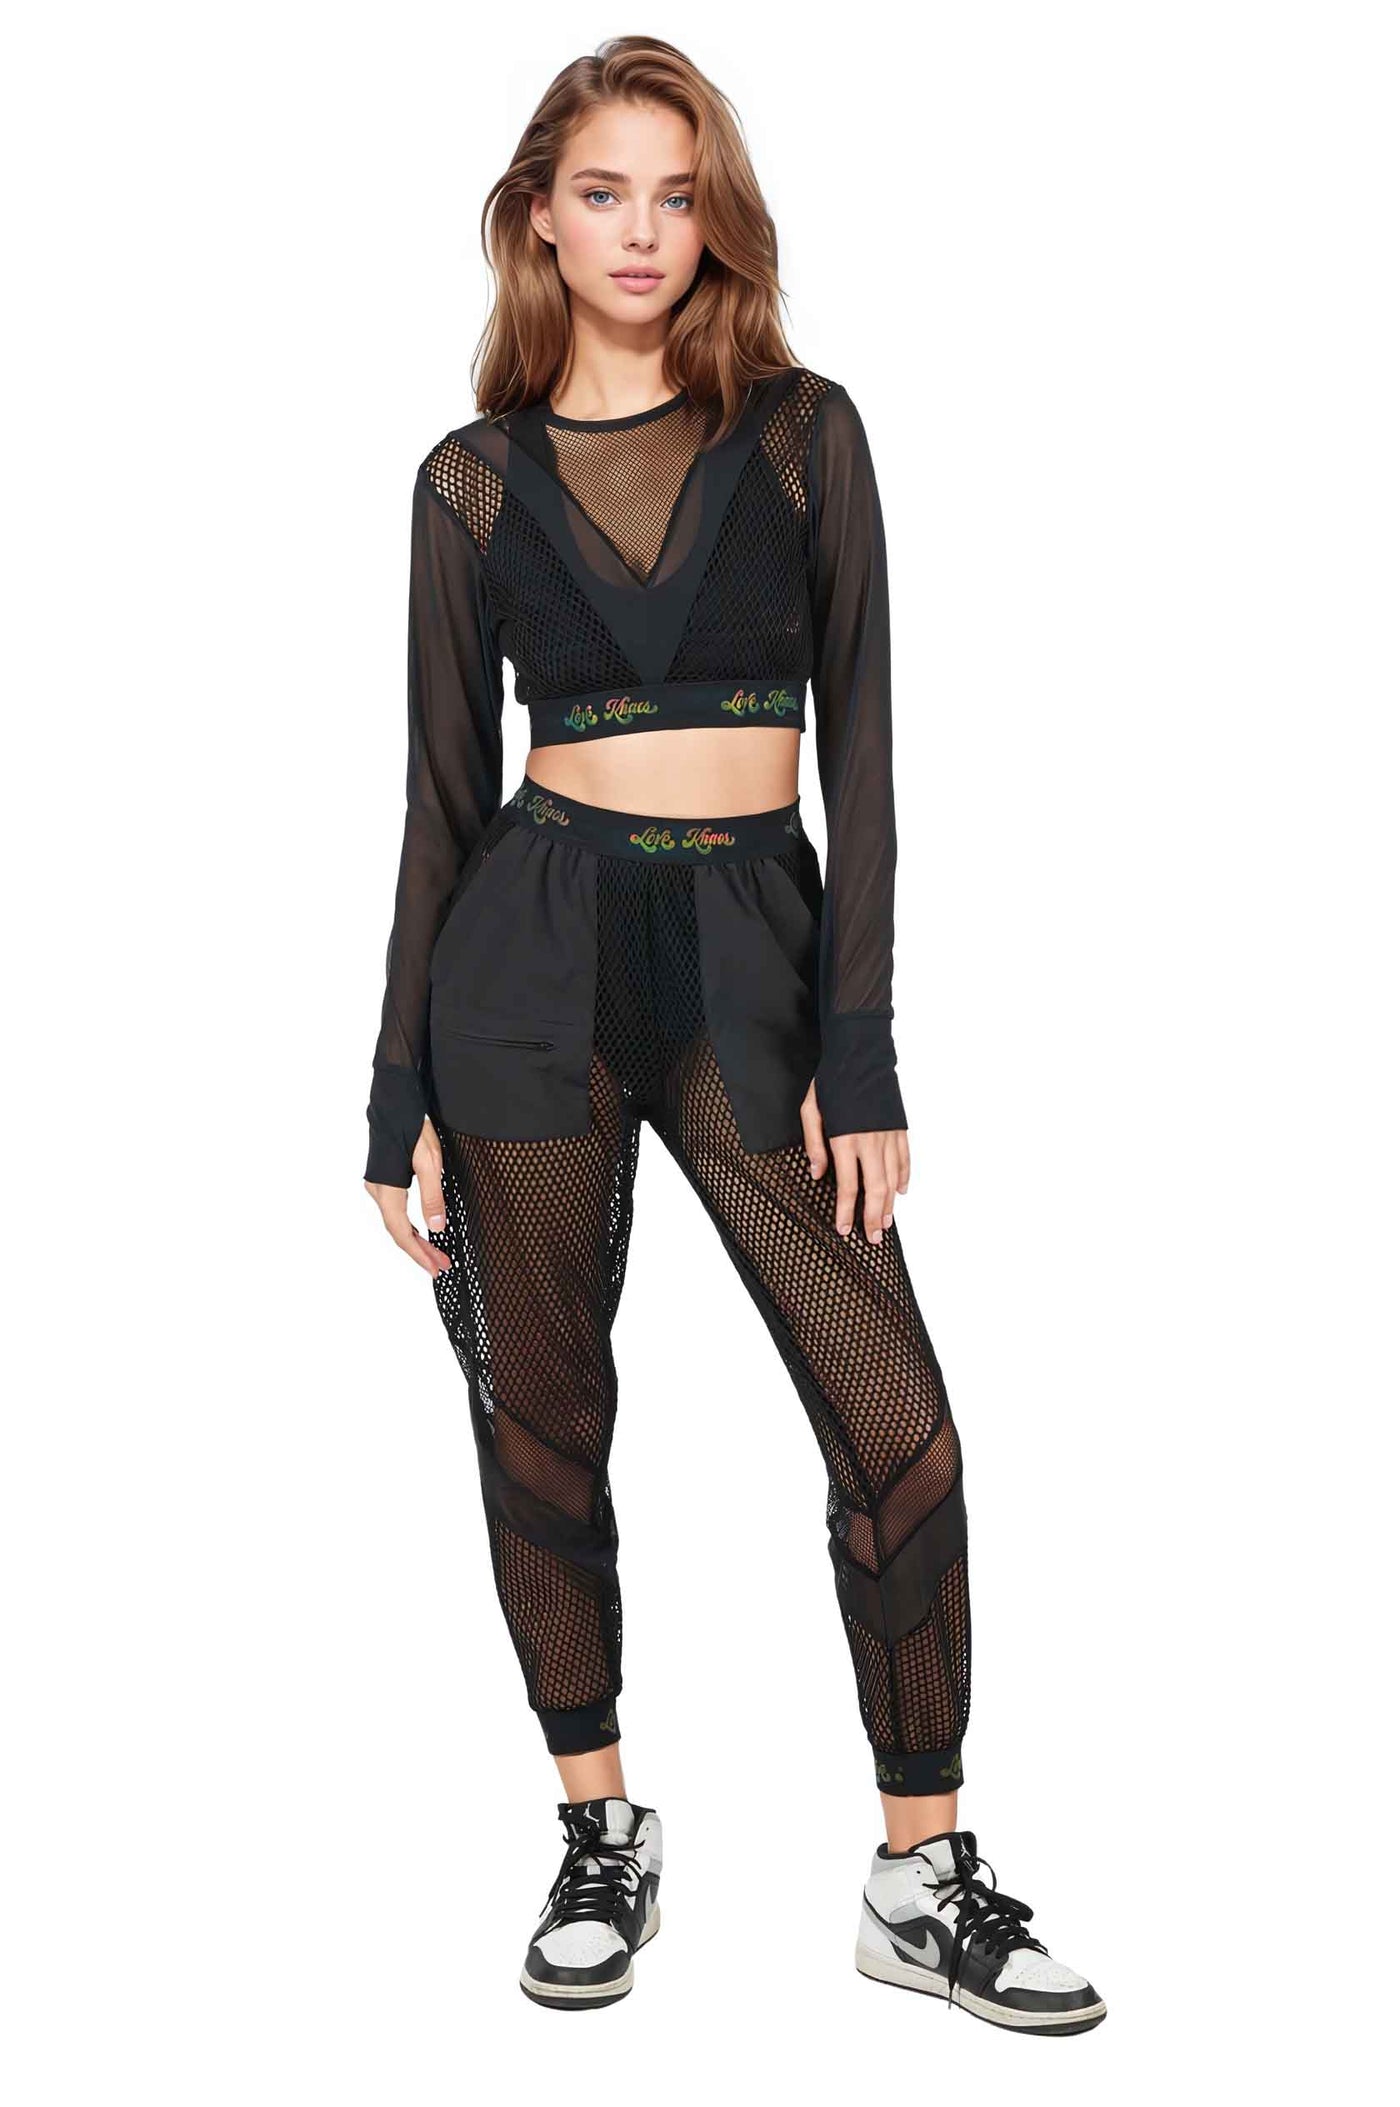 Womens black long sleeve mesh crop top with reflective elastic from Love Khaos.